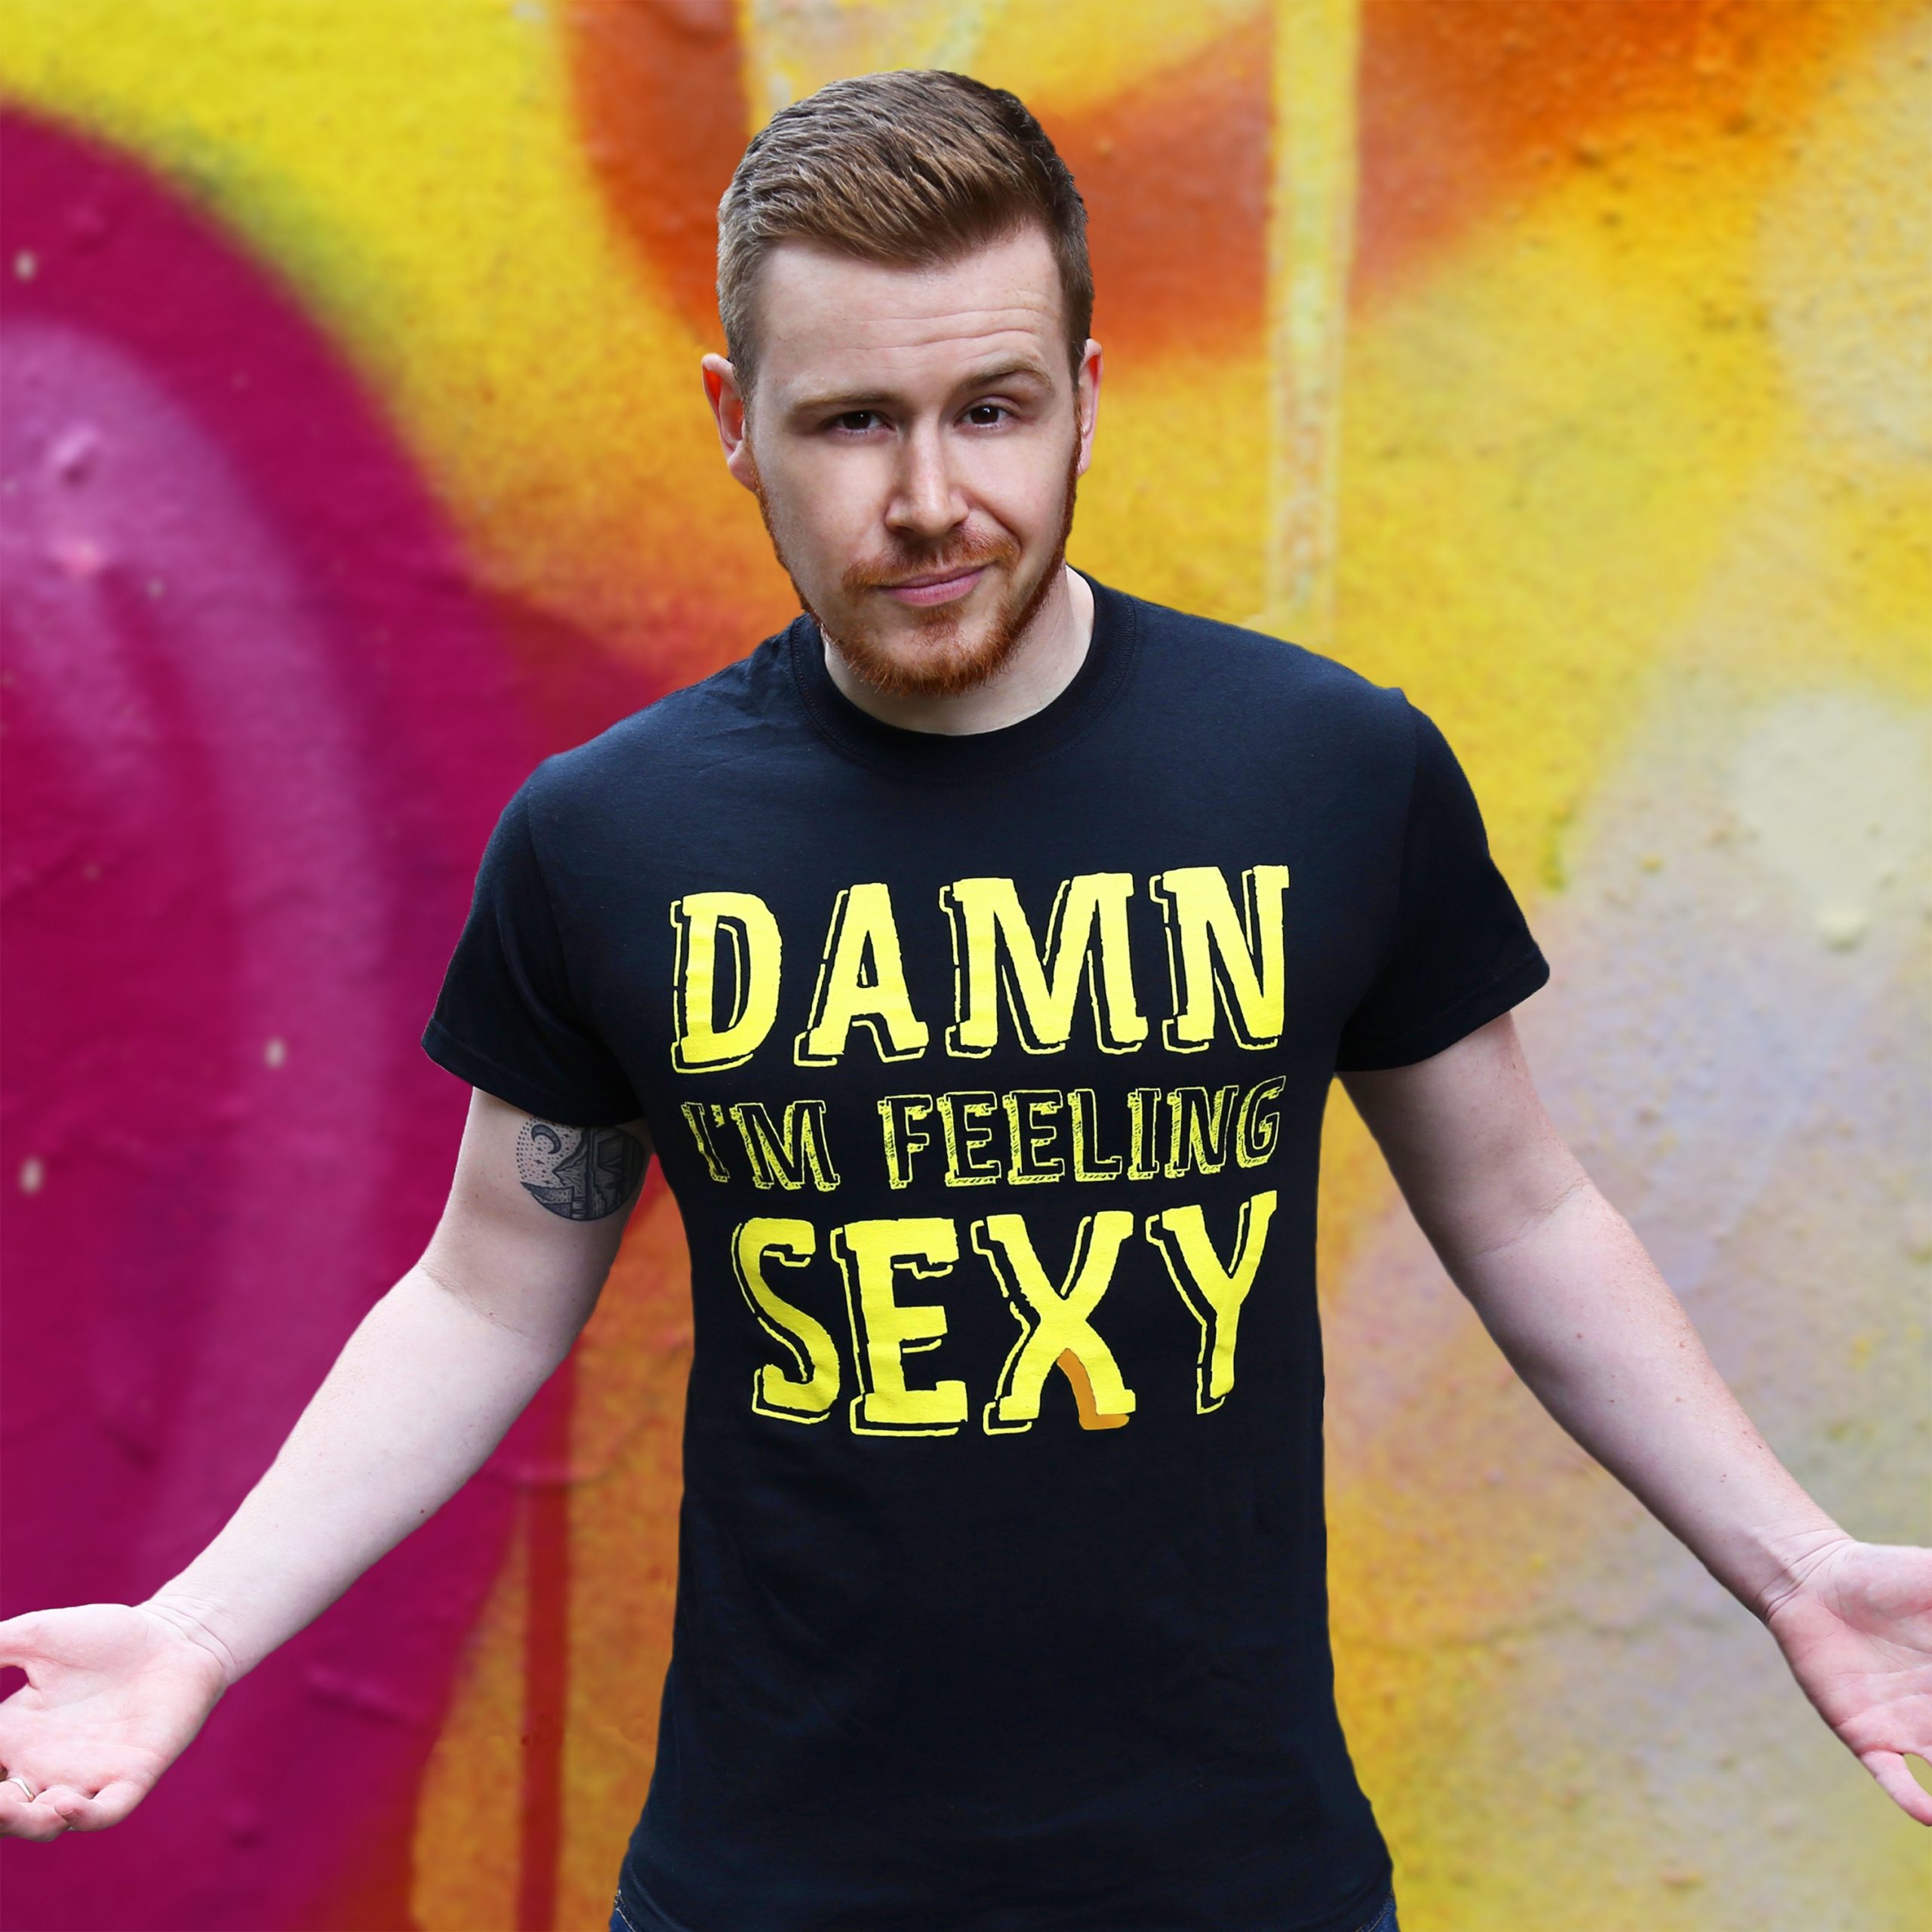 The Noise Next Doors “damn Im Feeling Sexy” T Shirt Black And Yellow The Noise Next Door